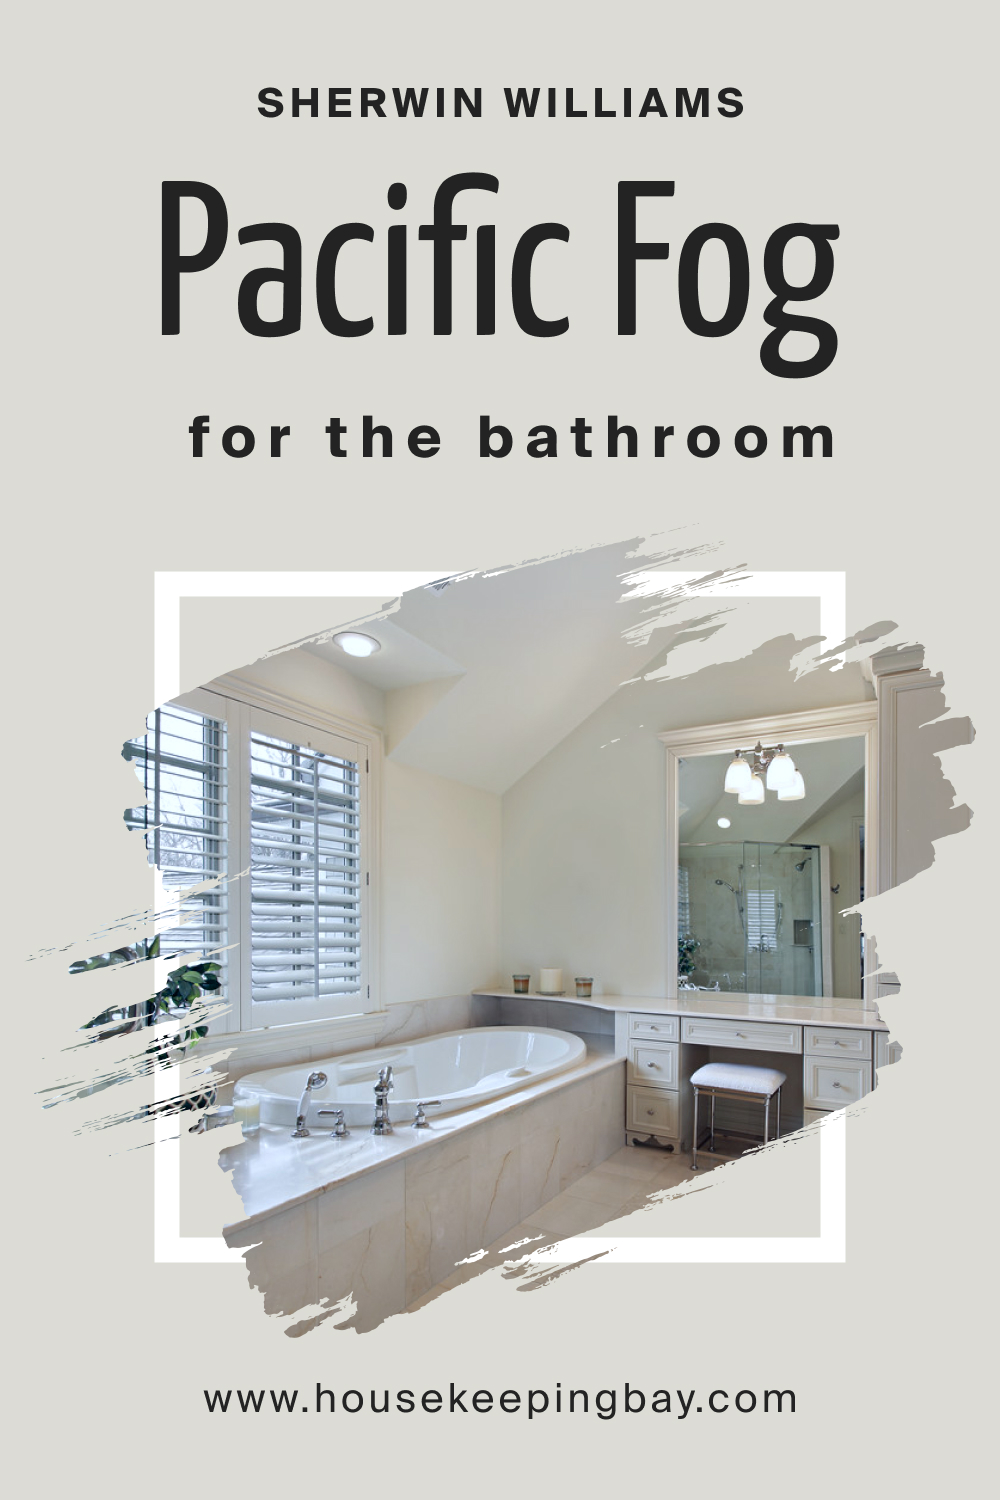 Sherwin Williams. SW 9627 Pacific Fog For the Bathroom